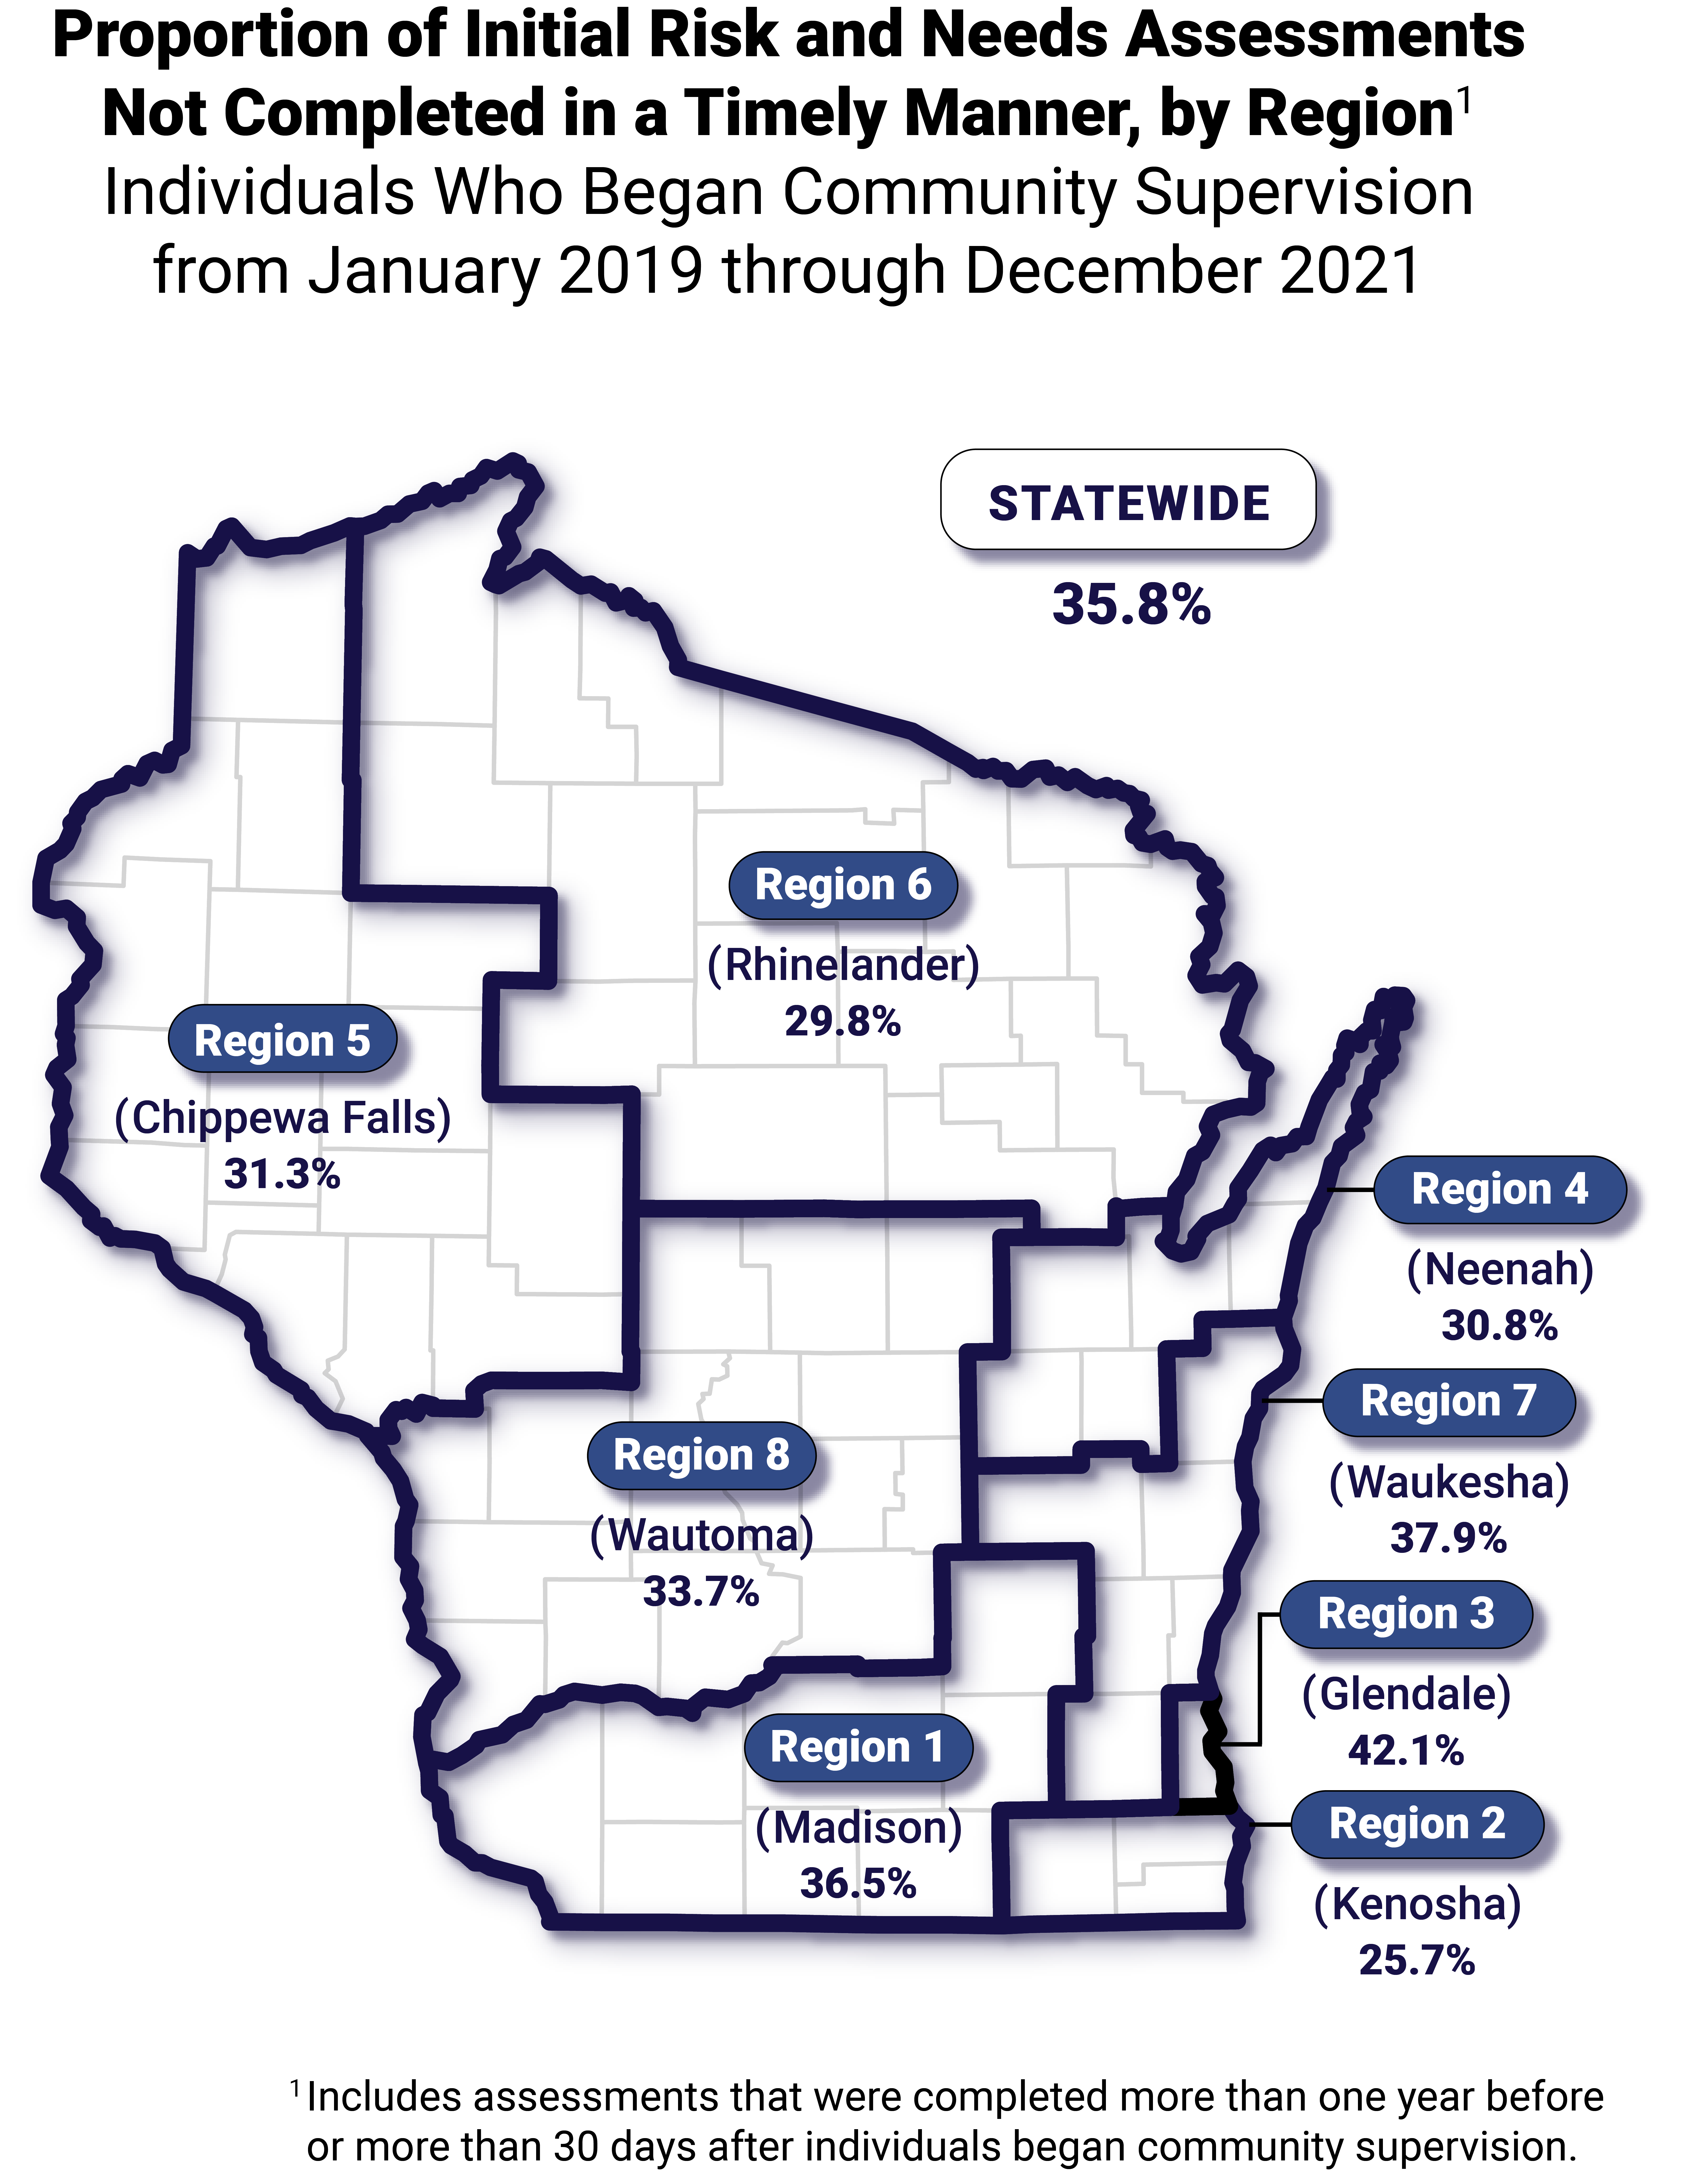 Map of Wisconsin Showing the Proportion of Initial Risk and Needs Assessments Not Completed in a Timely Manner, By Region